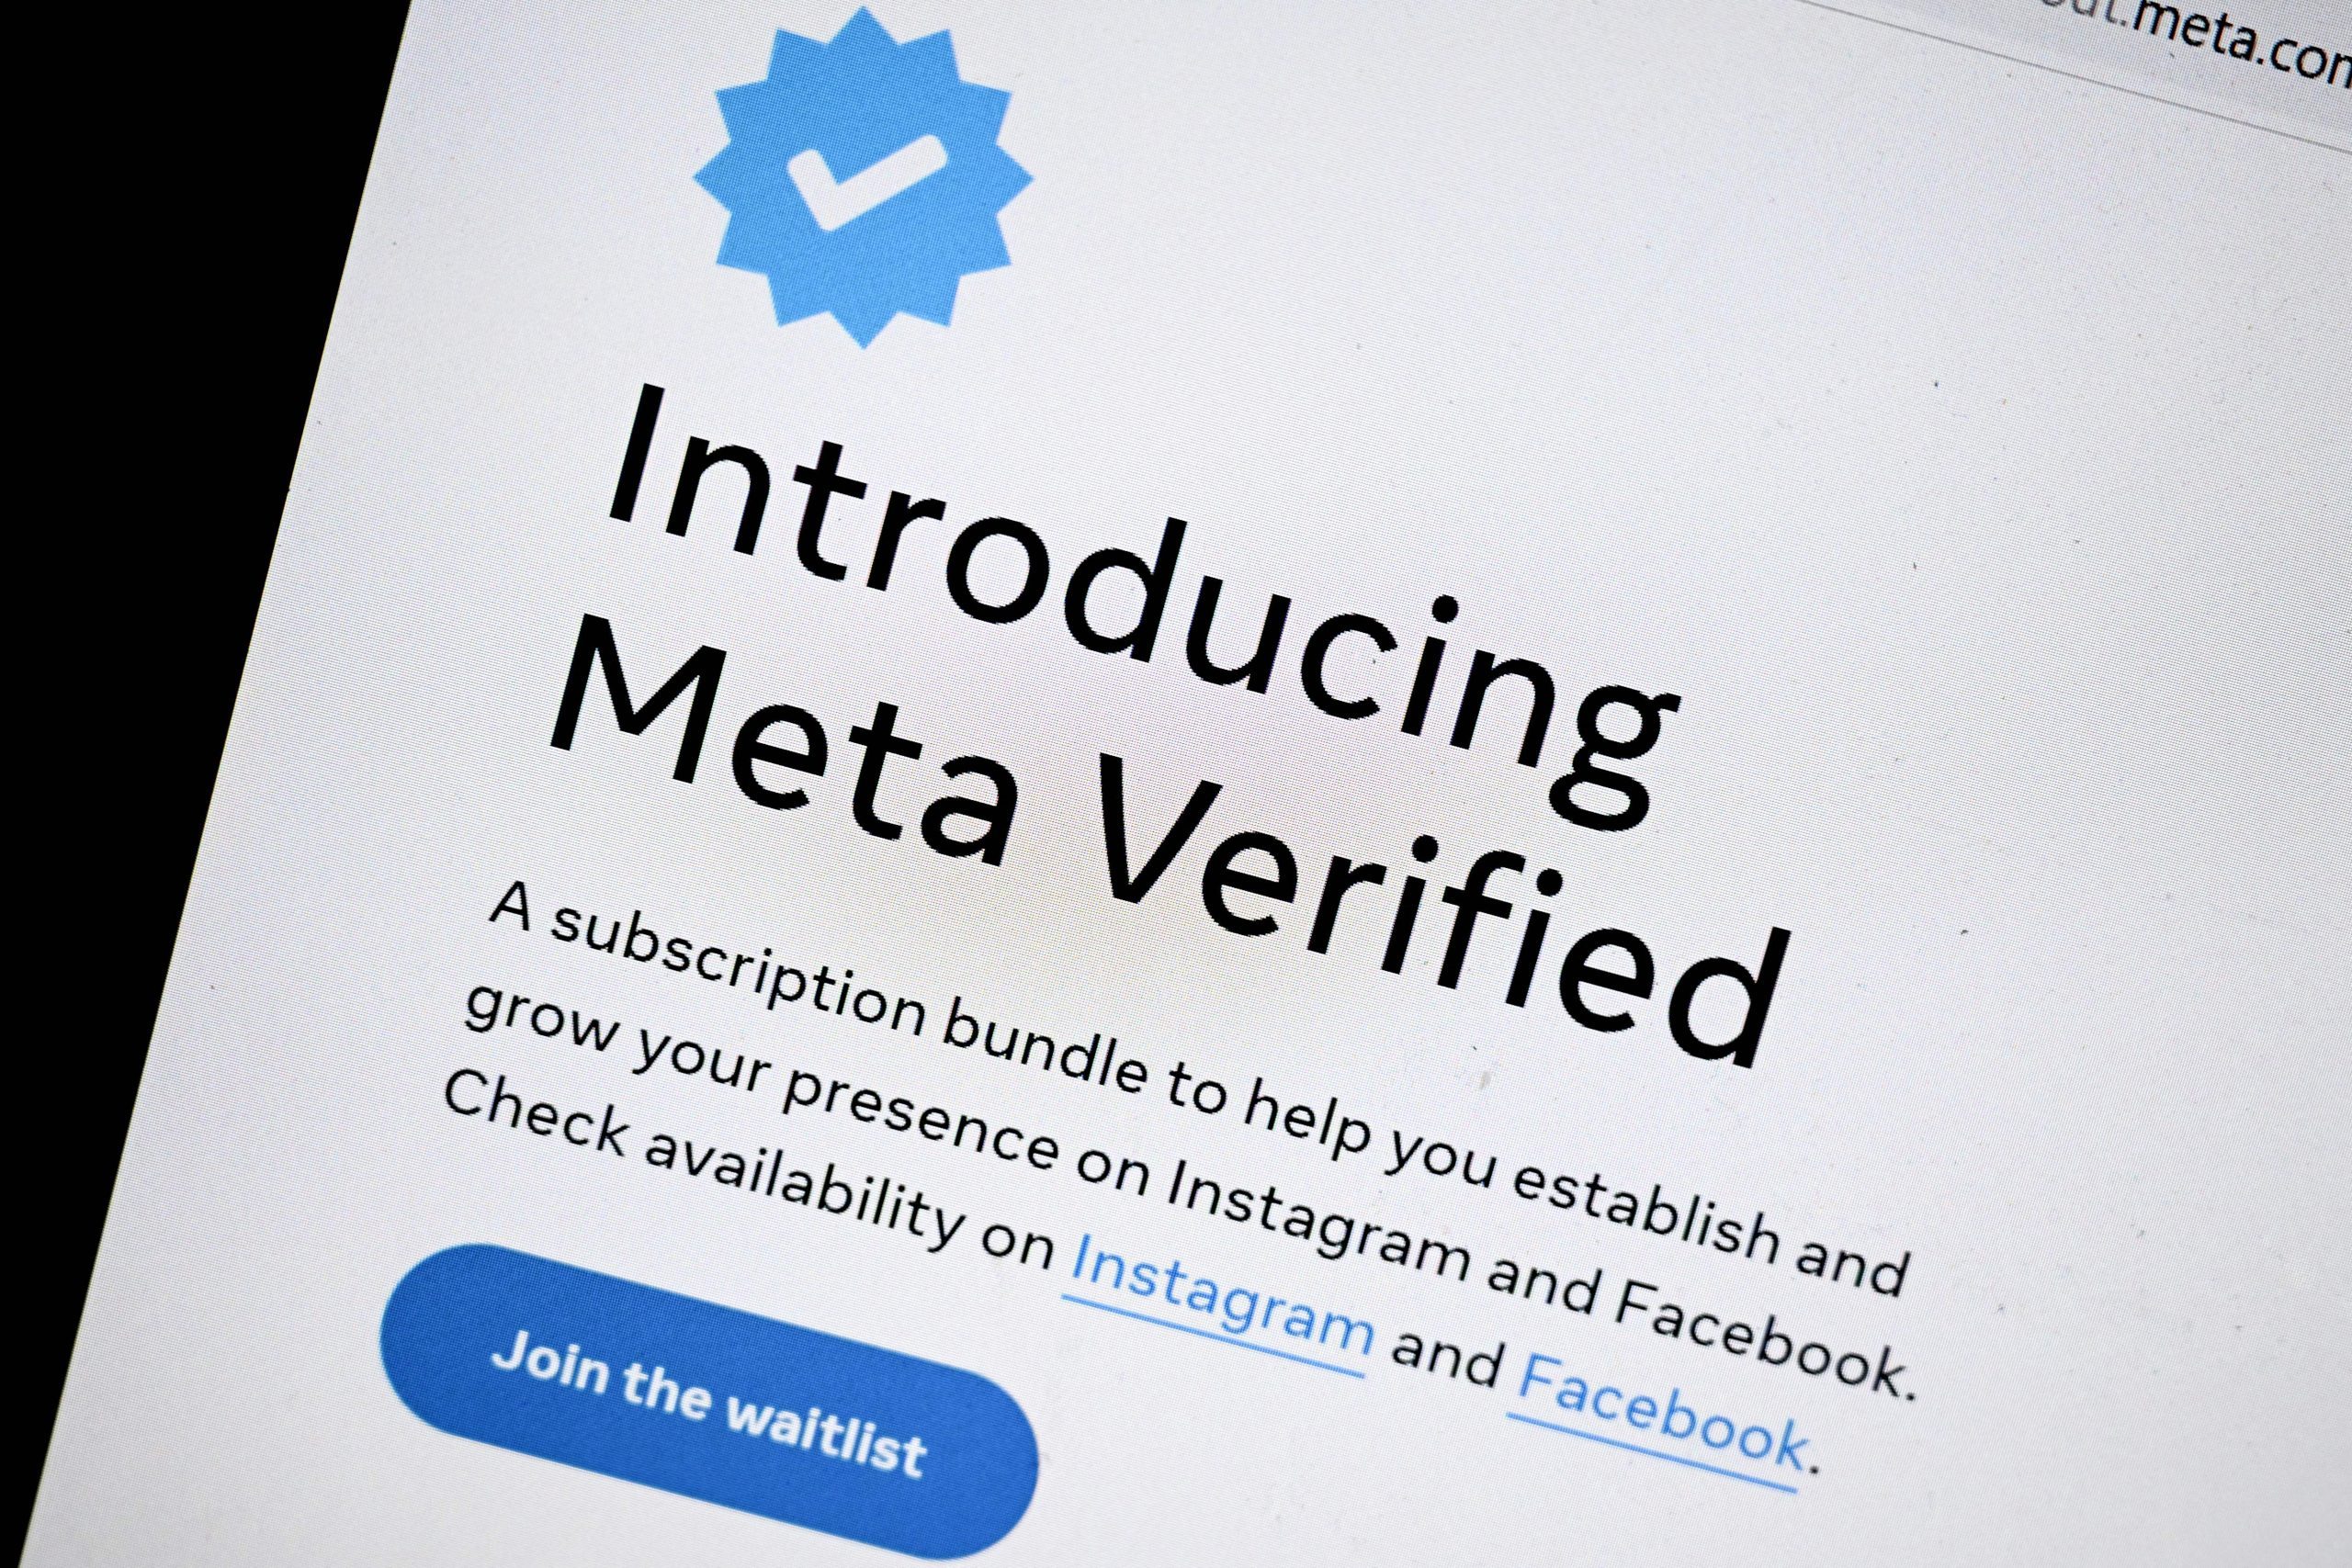 How To Get Verified On All Social Media - Noble House Media